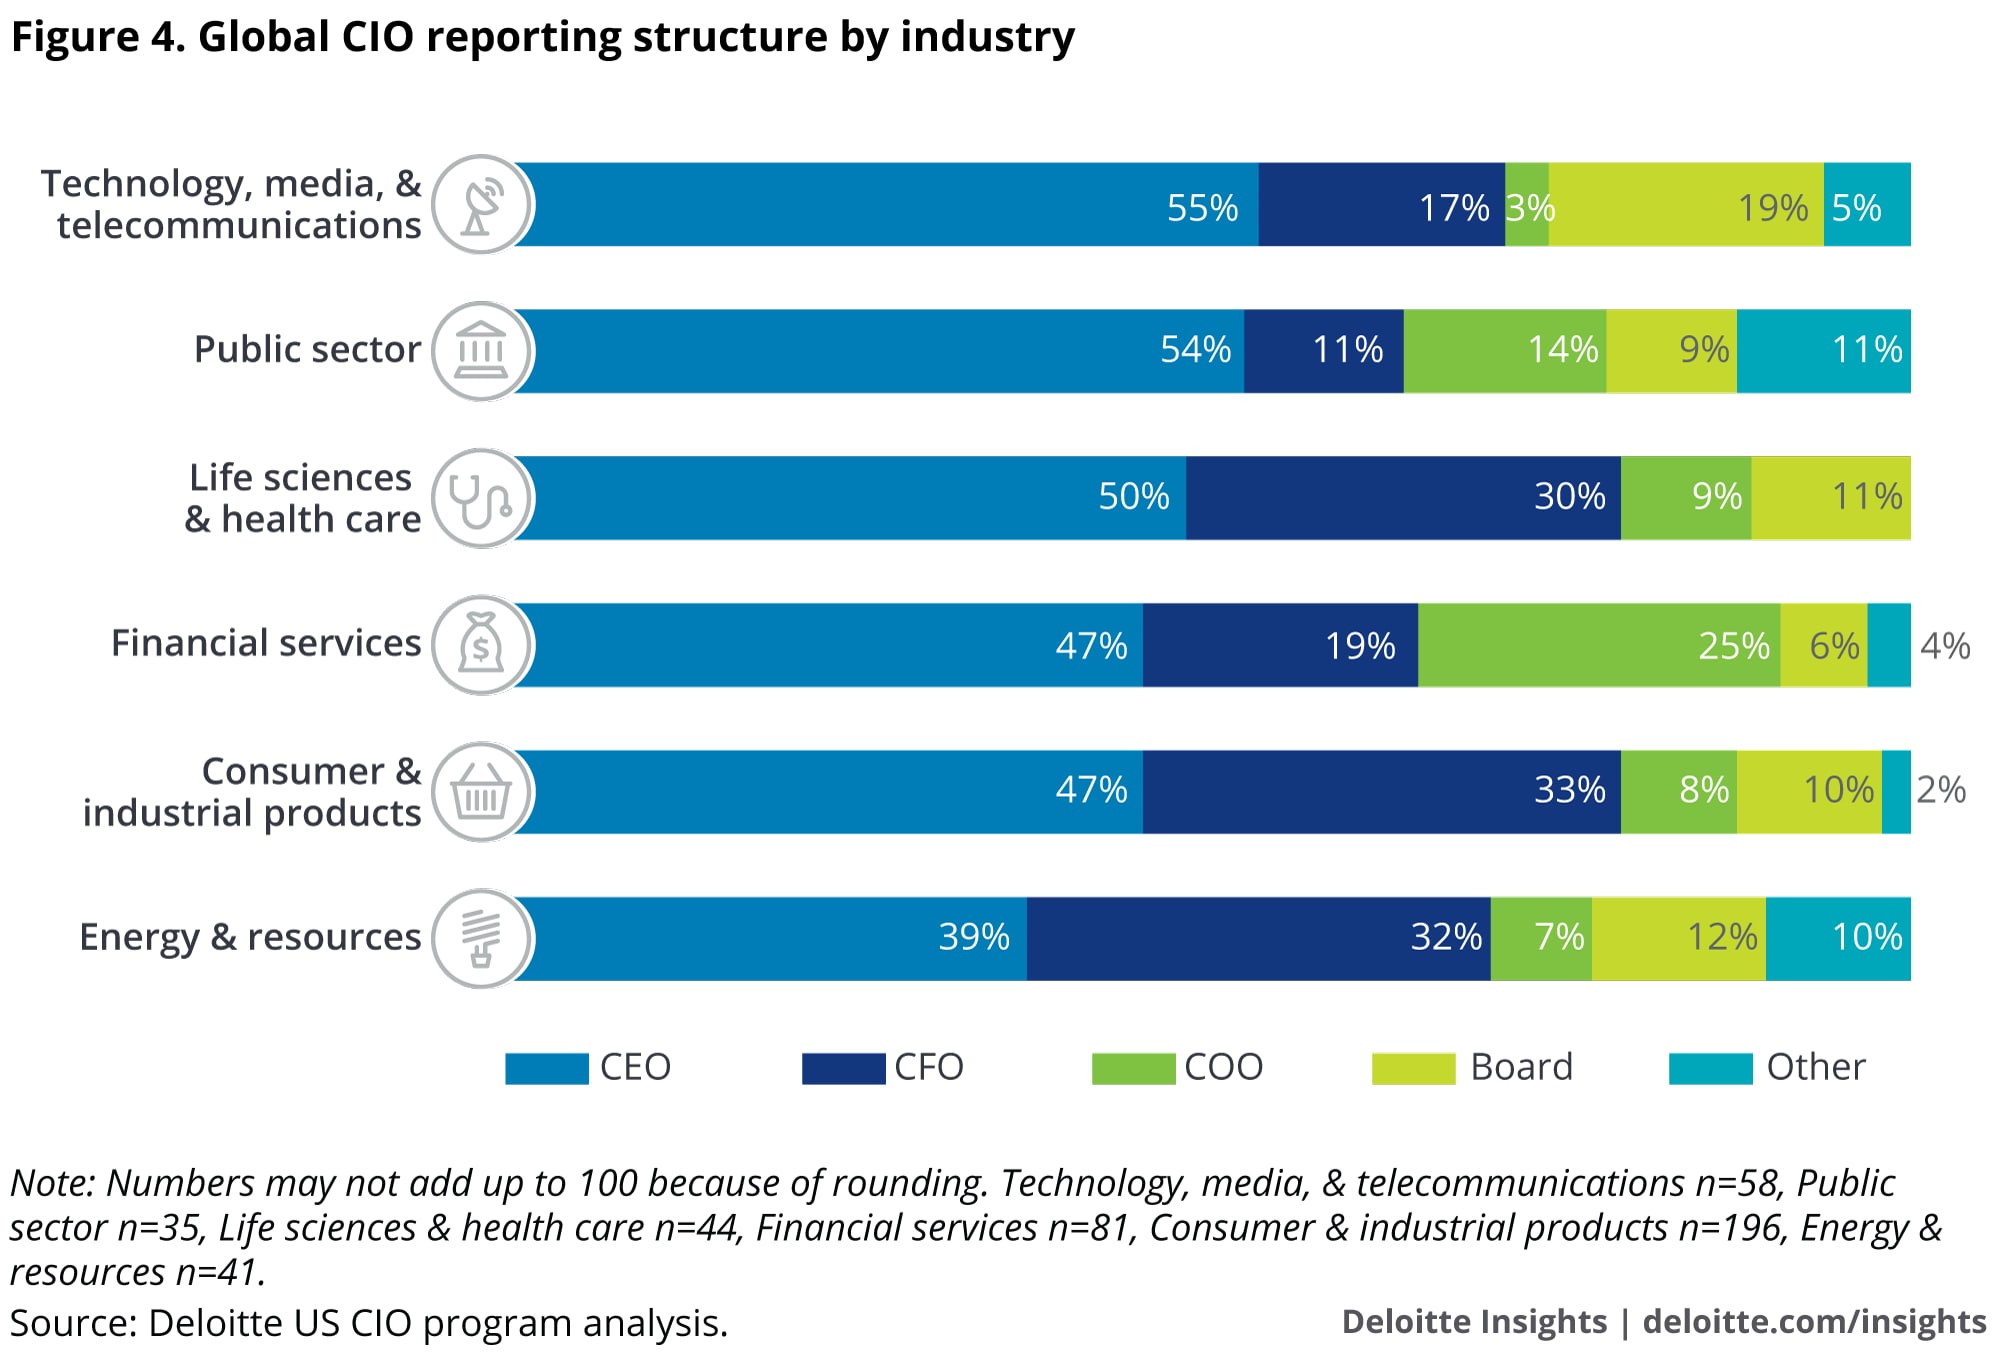 Global CIO reporting structure by industry